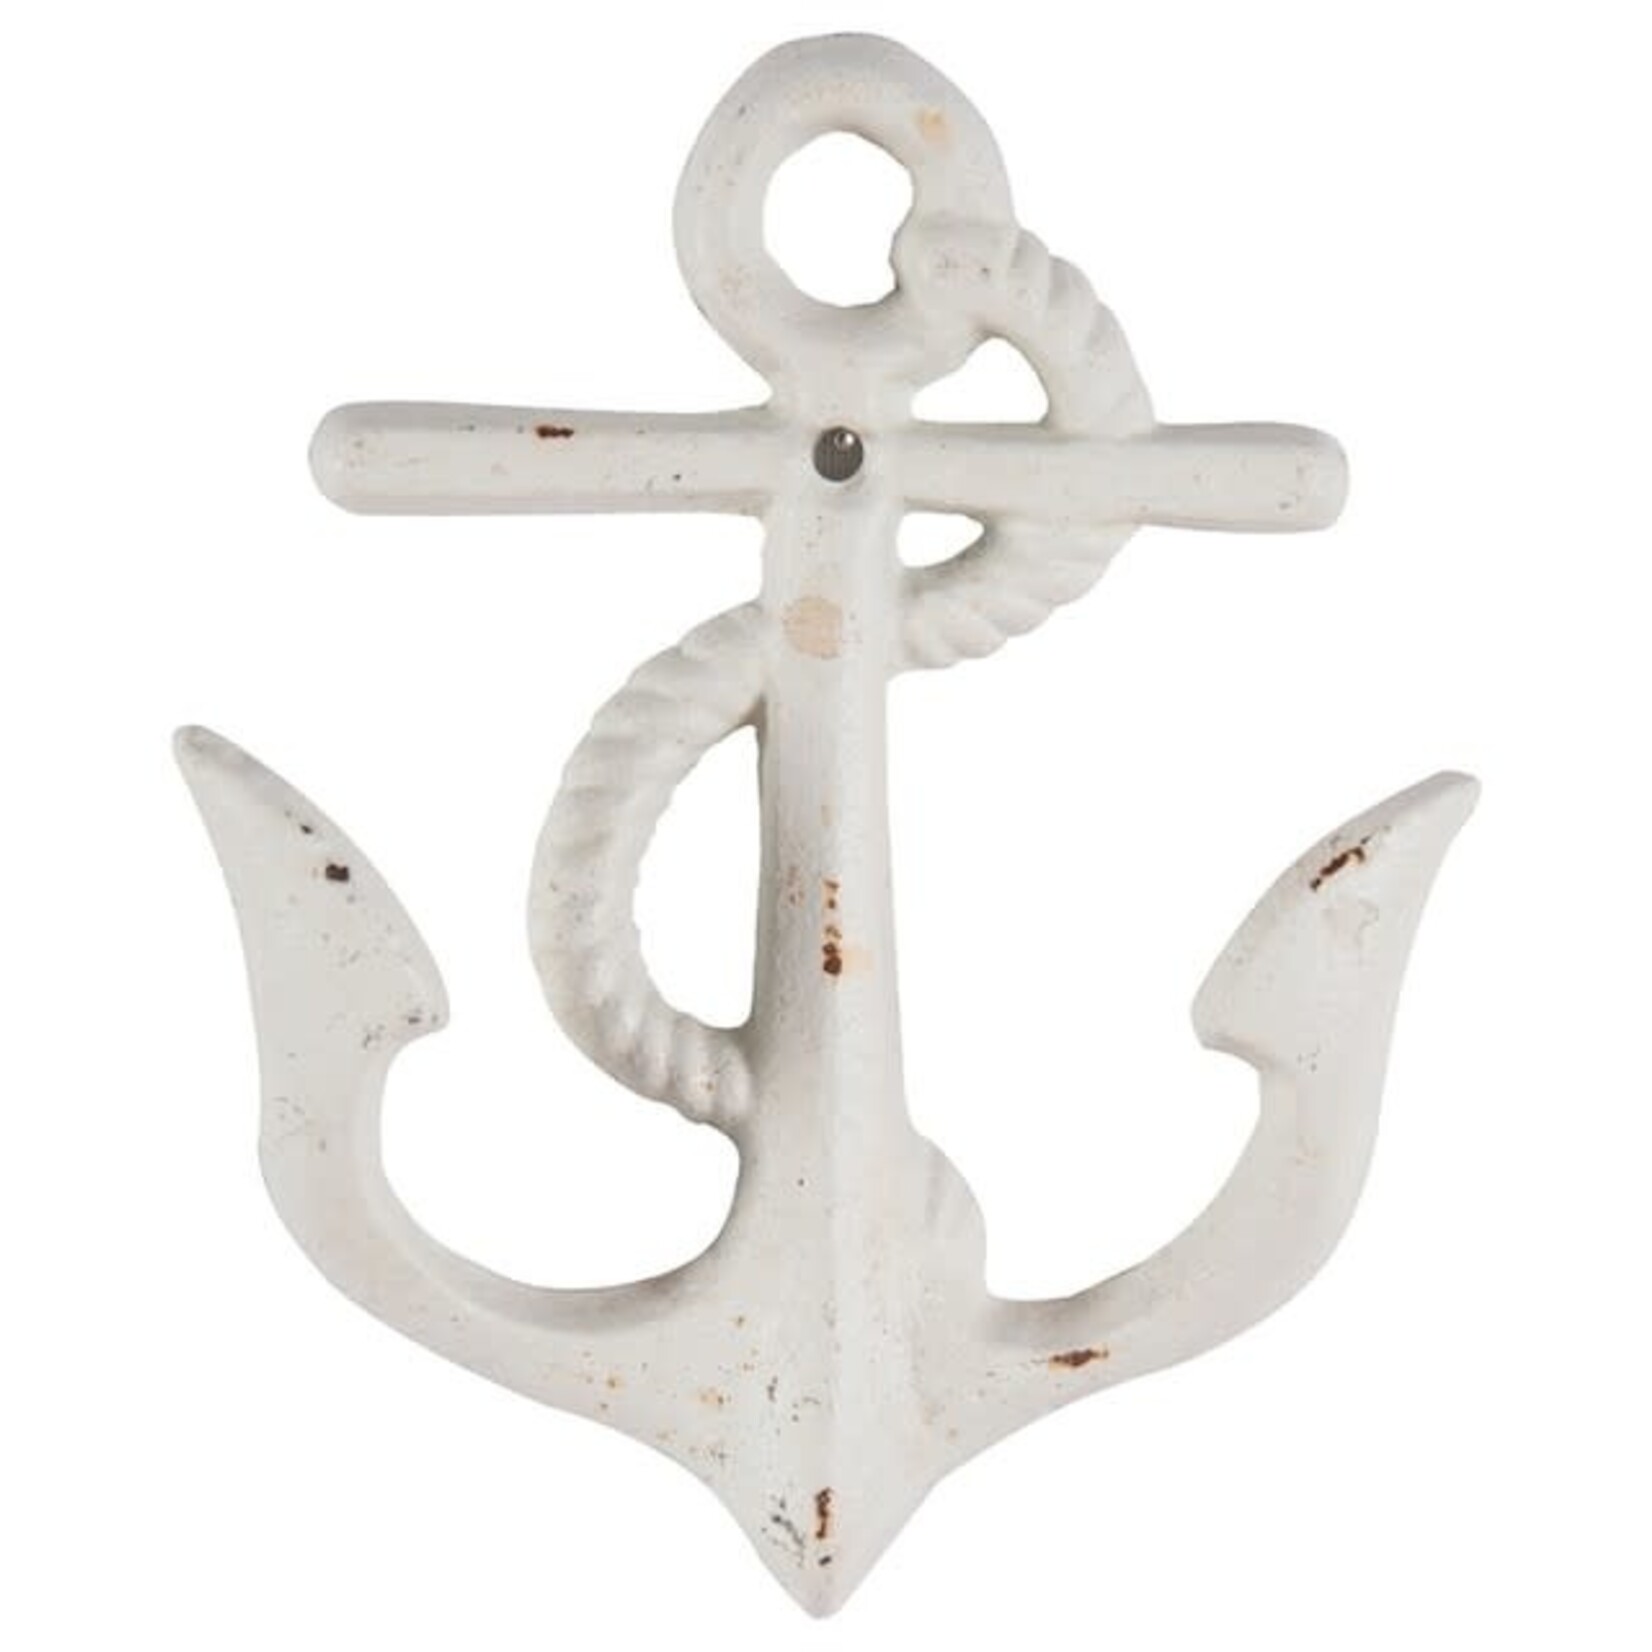 Design Imports Iron Anchor Wall Hook